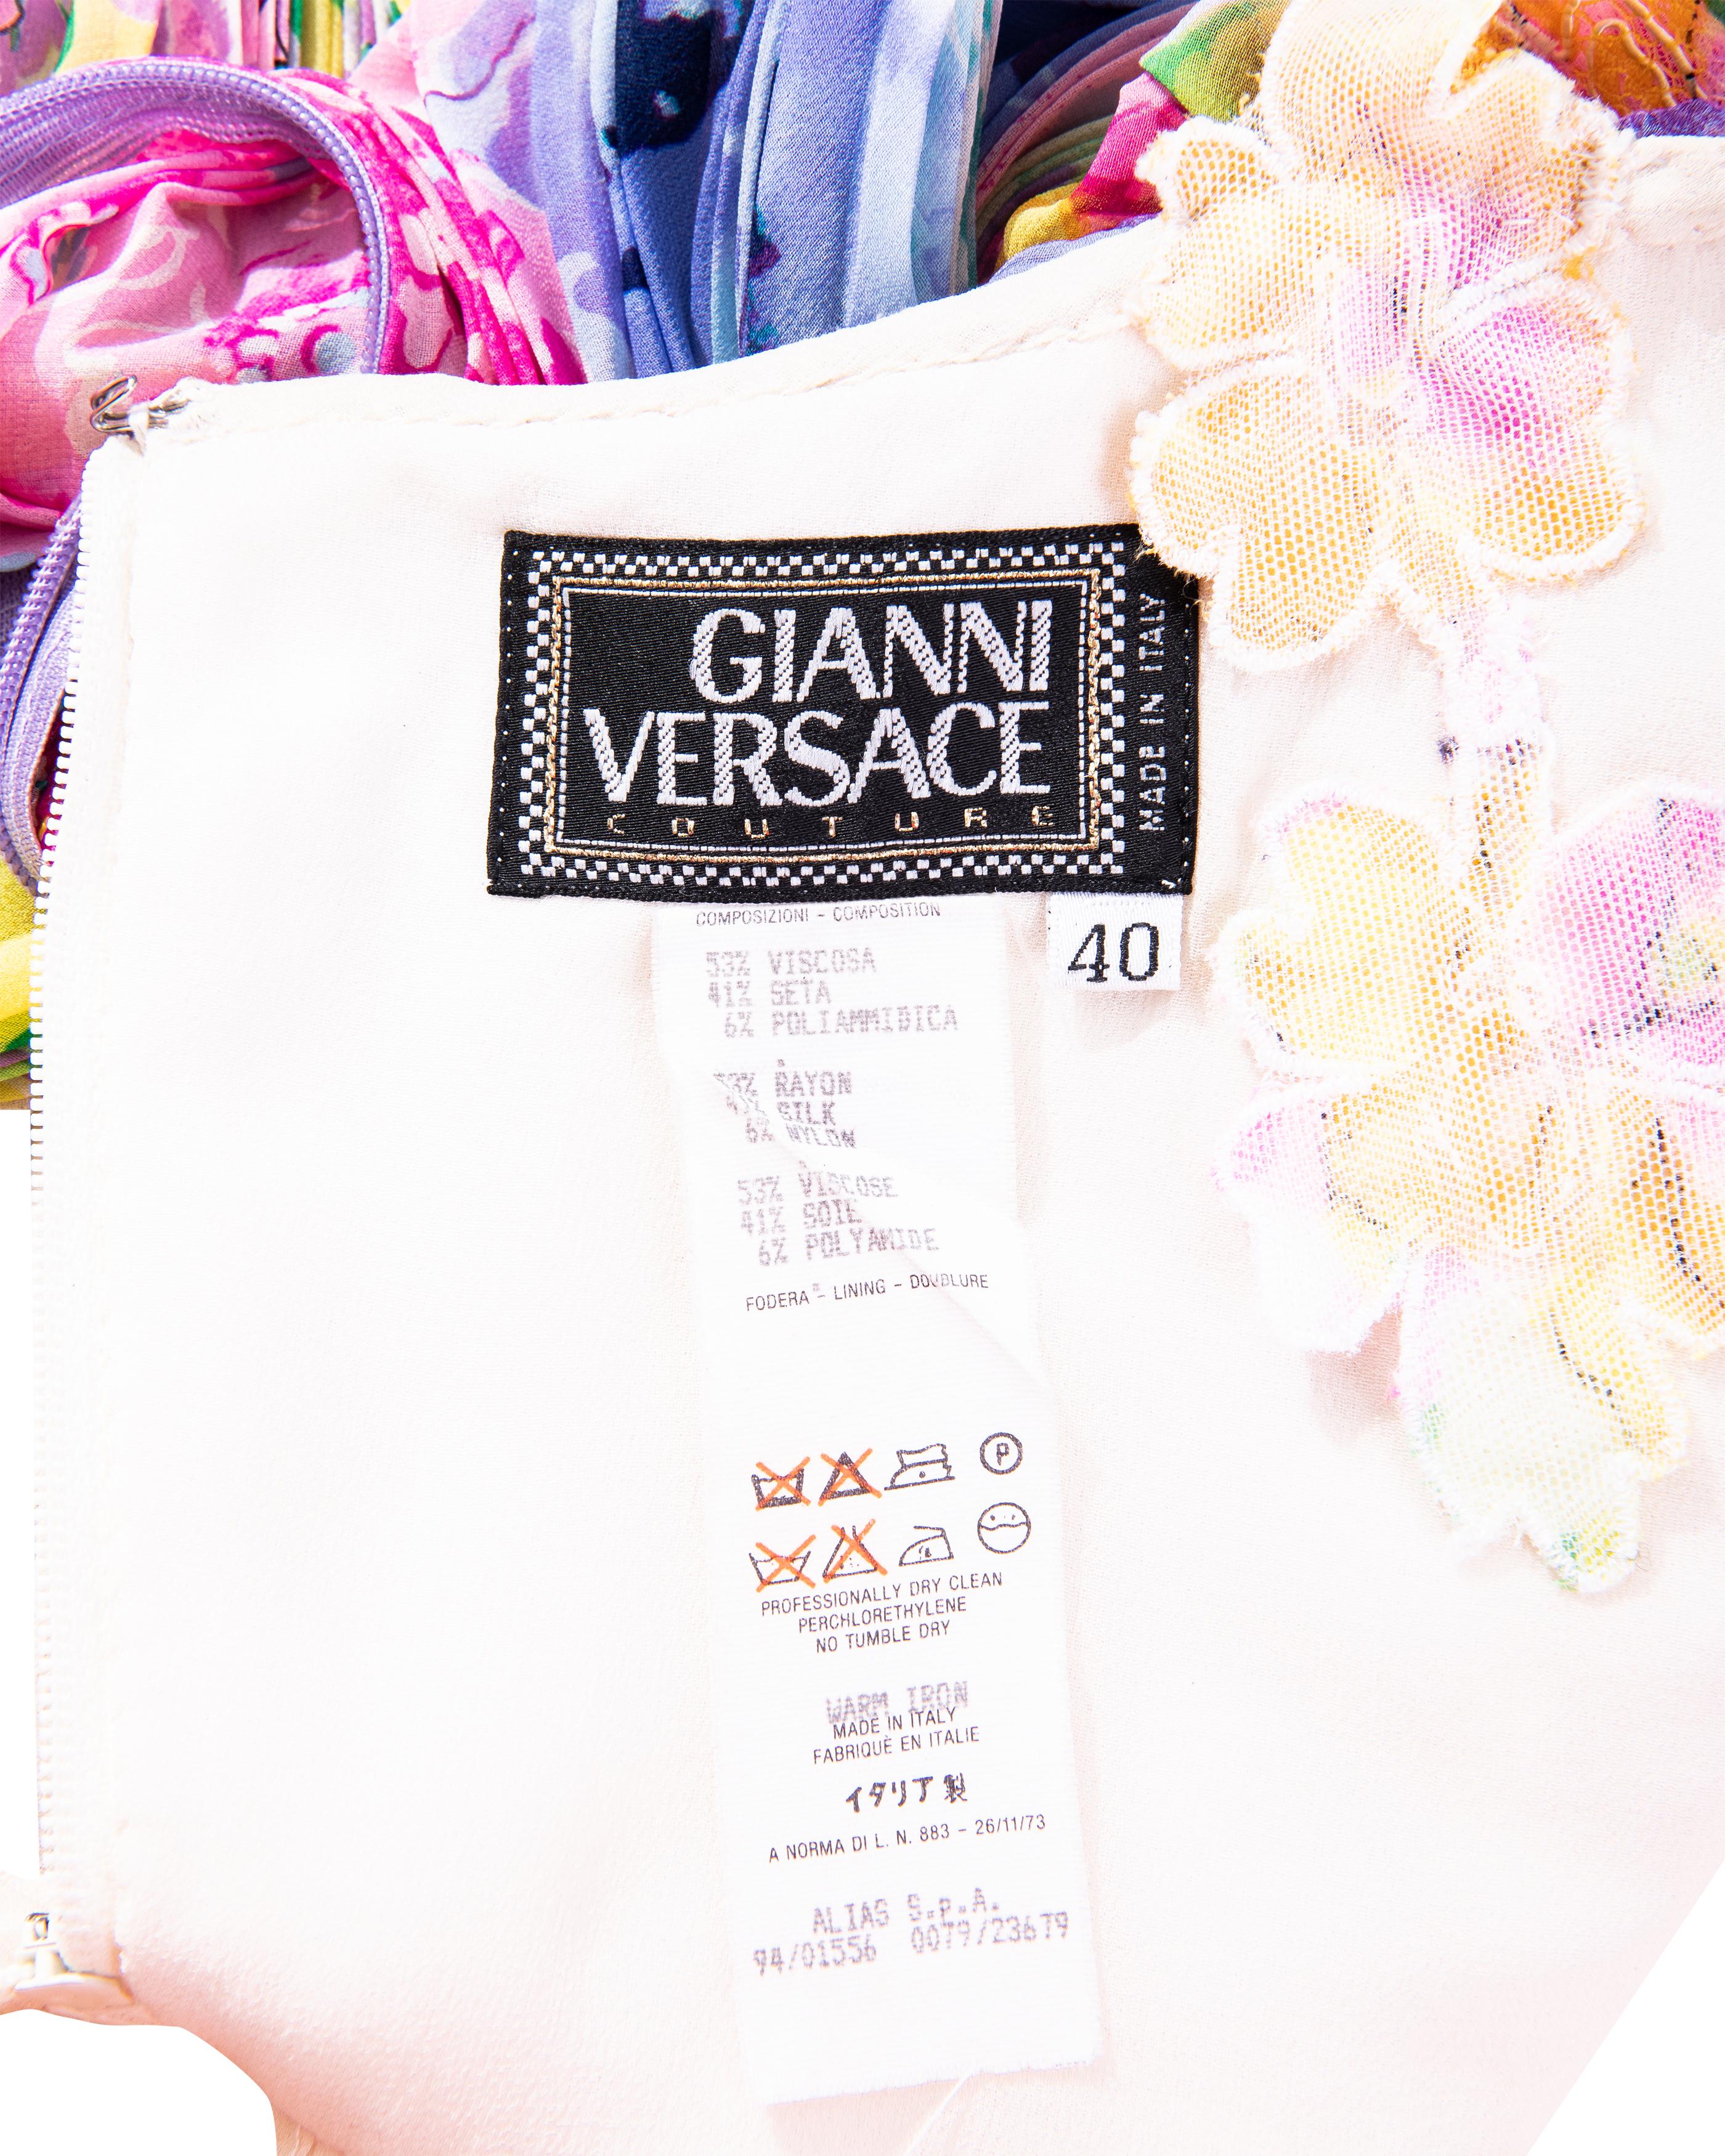 S/S 1994 Gianni Versace Multicolor Floral Pleated Honeycomb Mini Dress 7